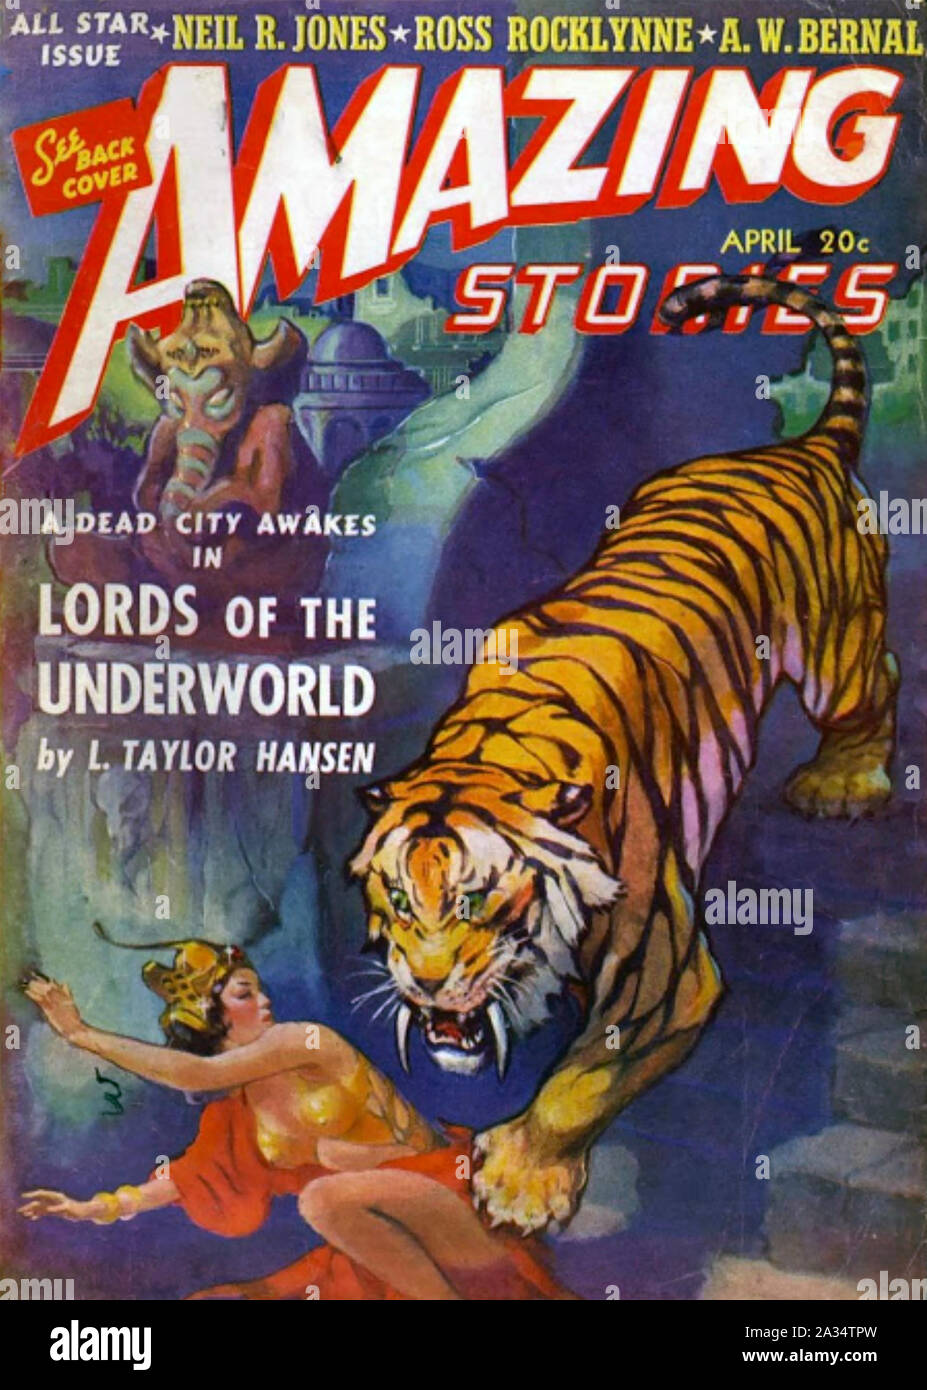 AMAZING STORIES American sci-fi magazine edited by Hugo Gernsback with cover by James All St. John. April 1941 edition. Stock Photo